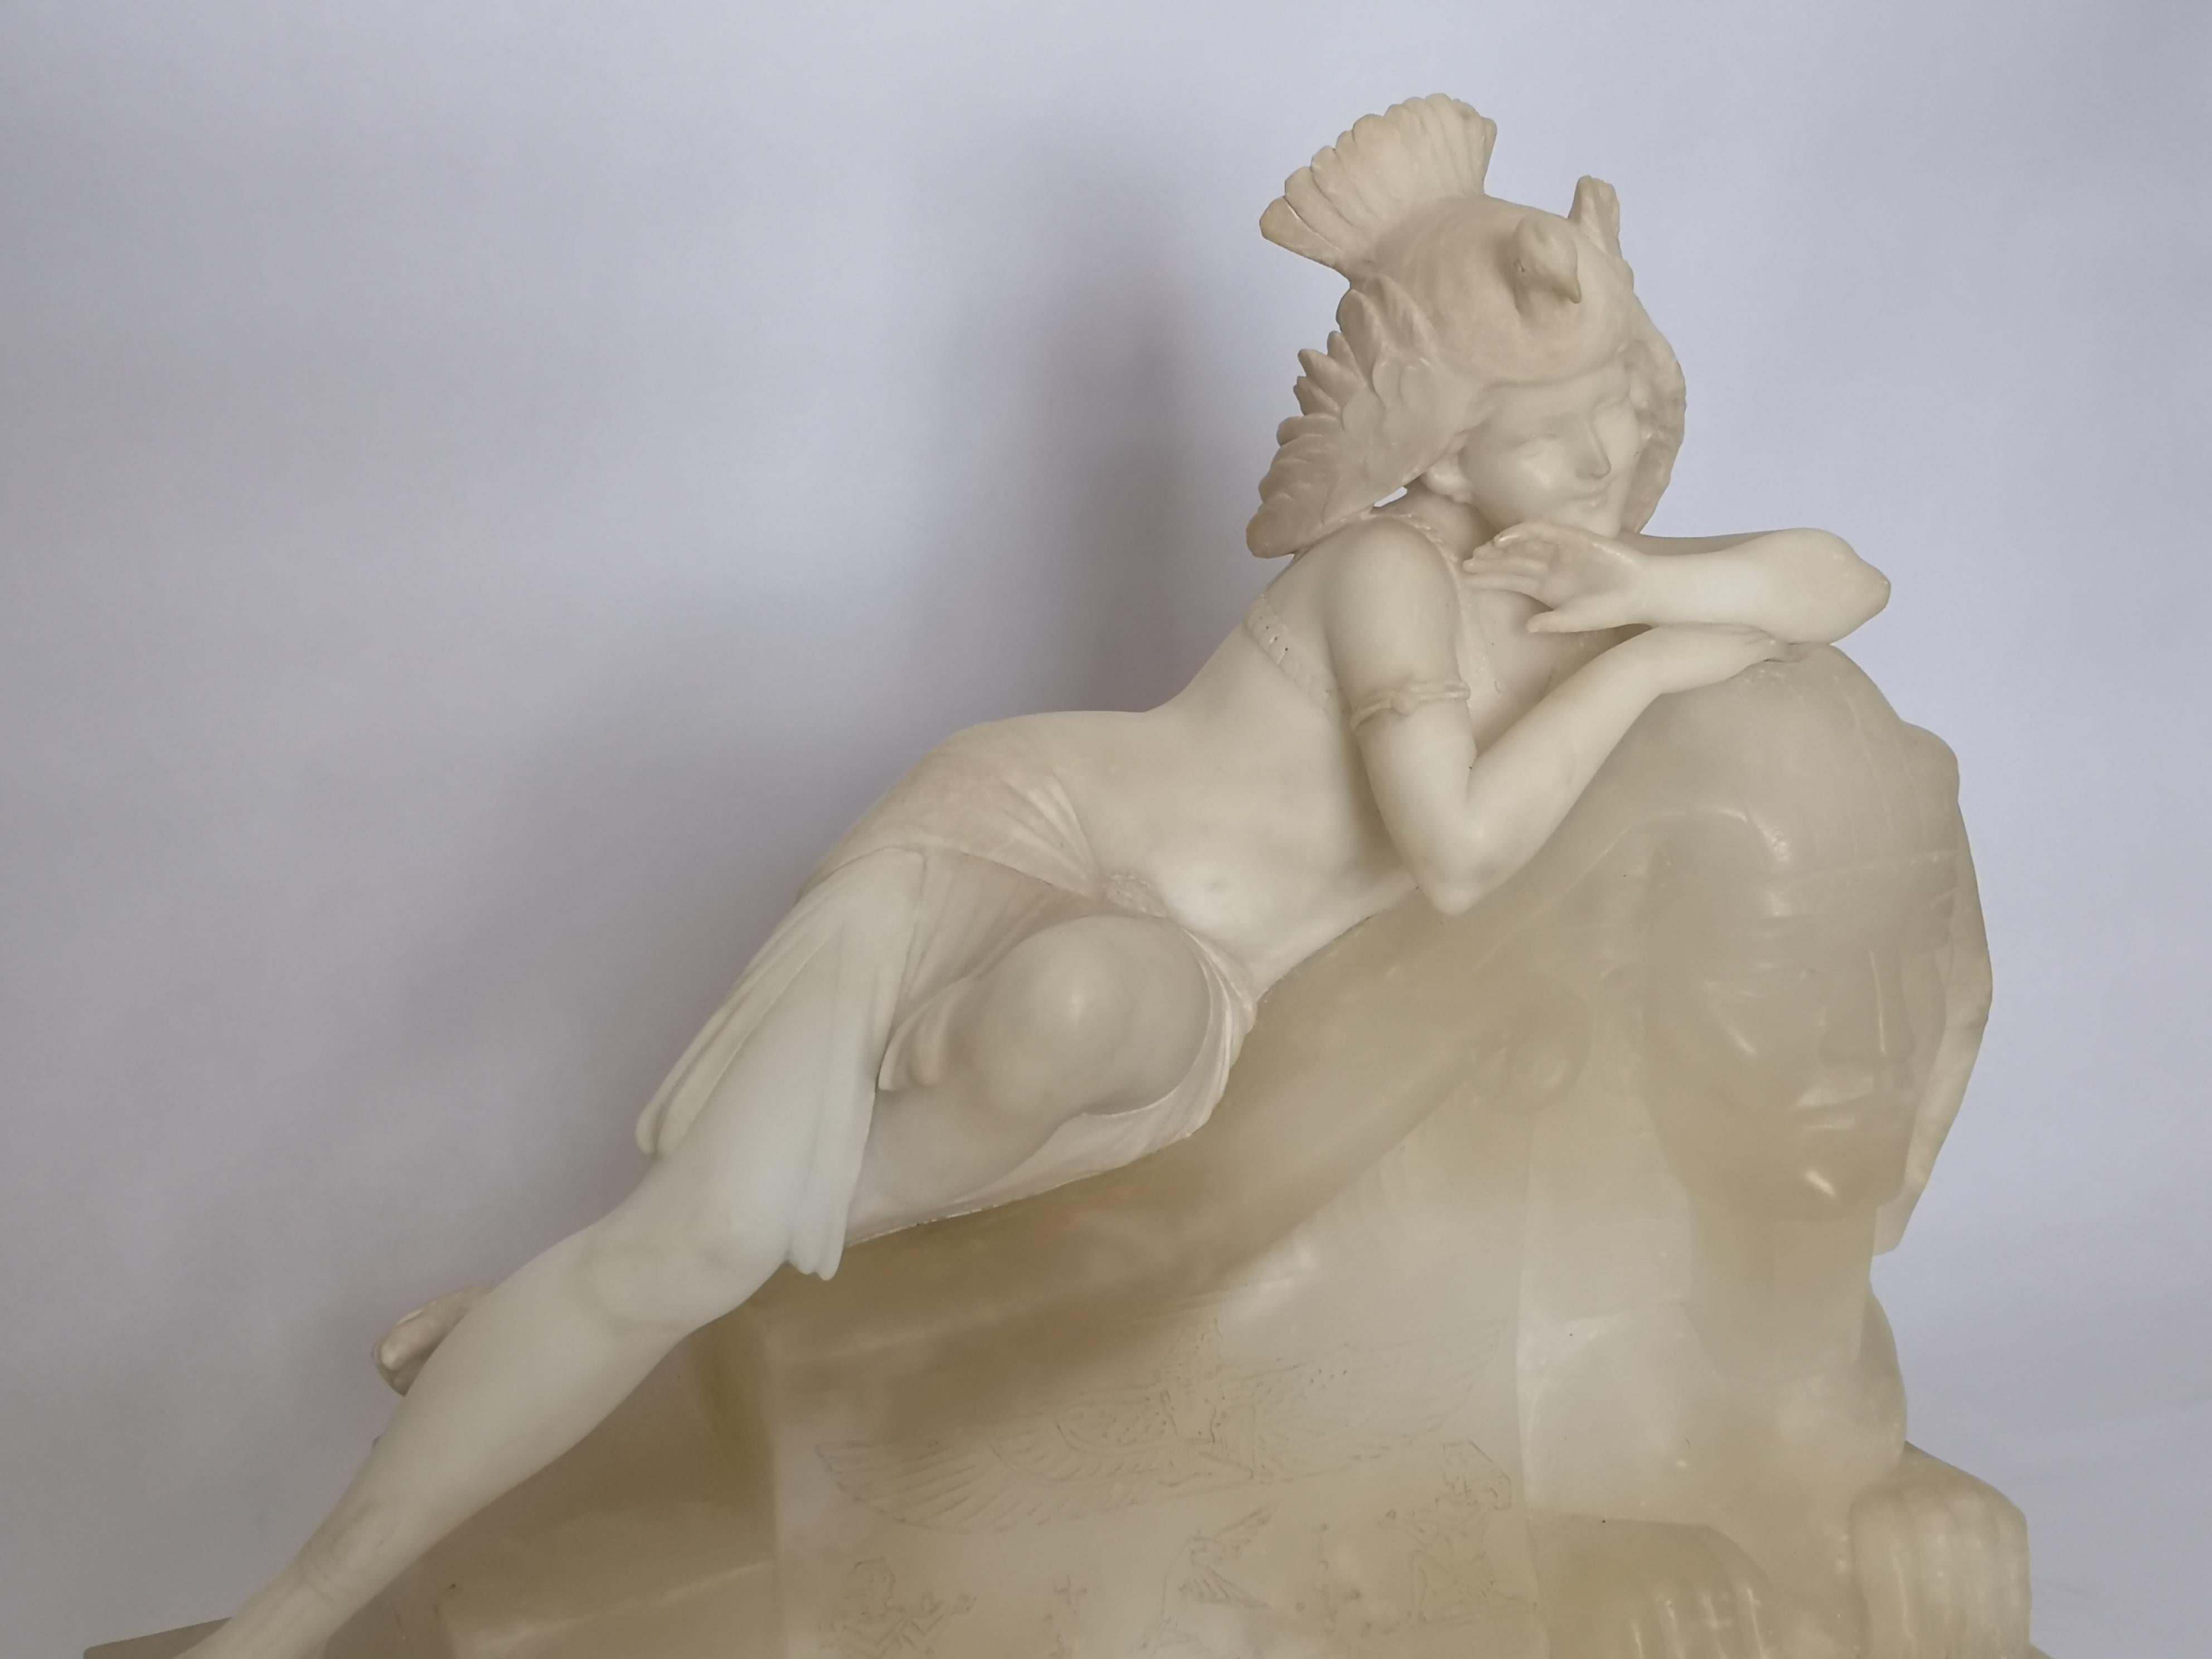 Alabaster 20th Century Art Deco Fantasy Sculpture / Lamp of a Lady on a Sphinx